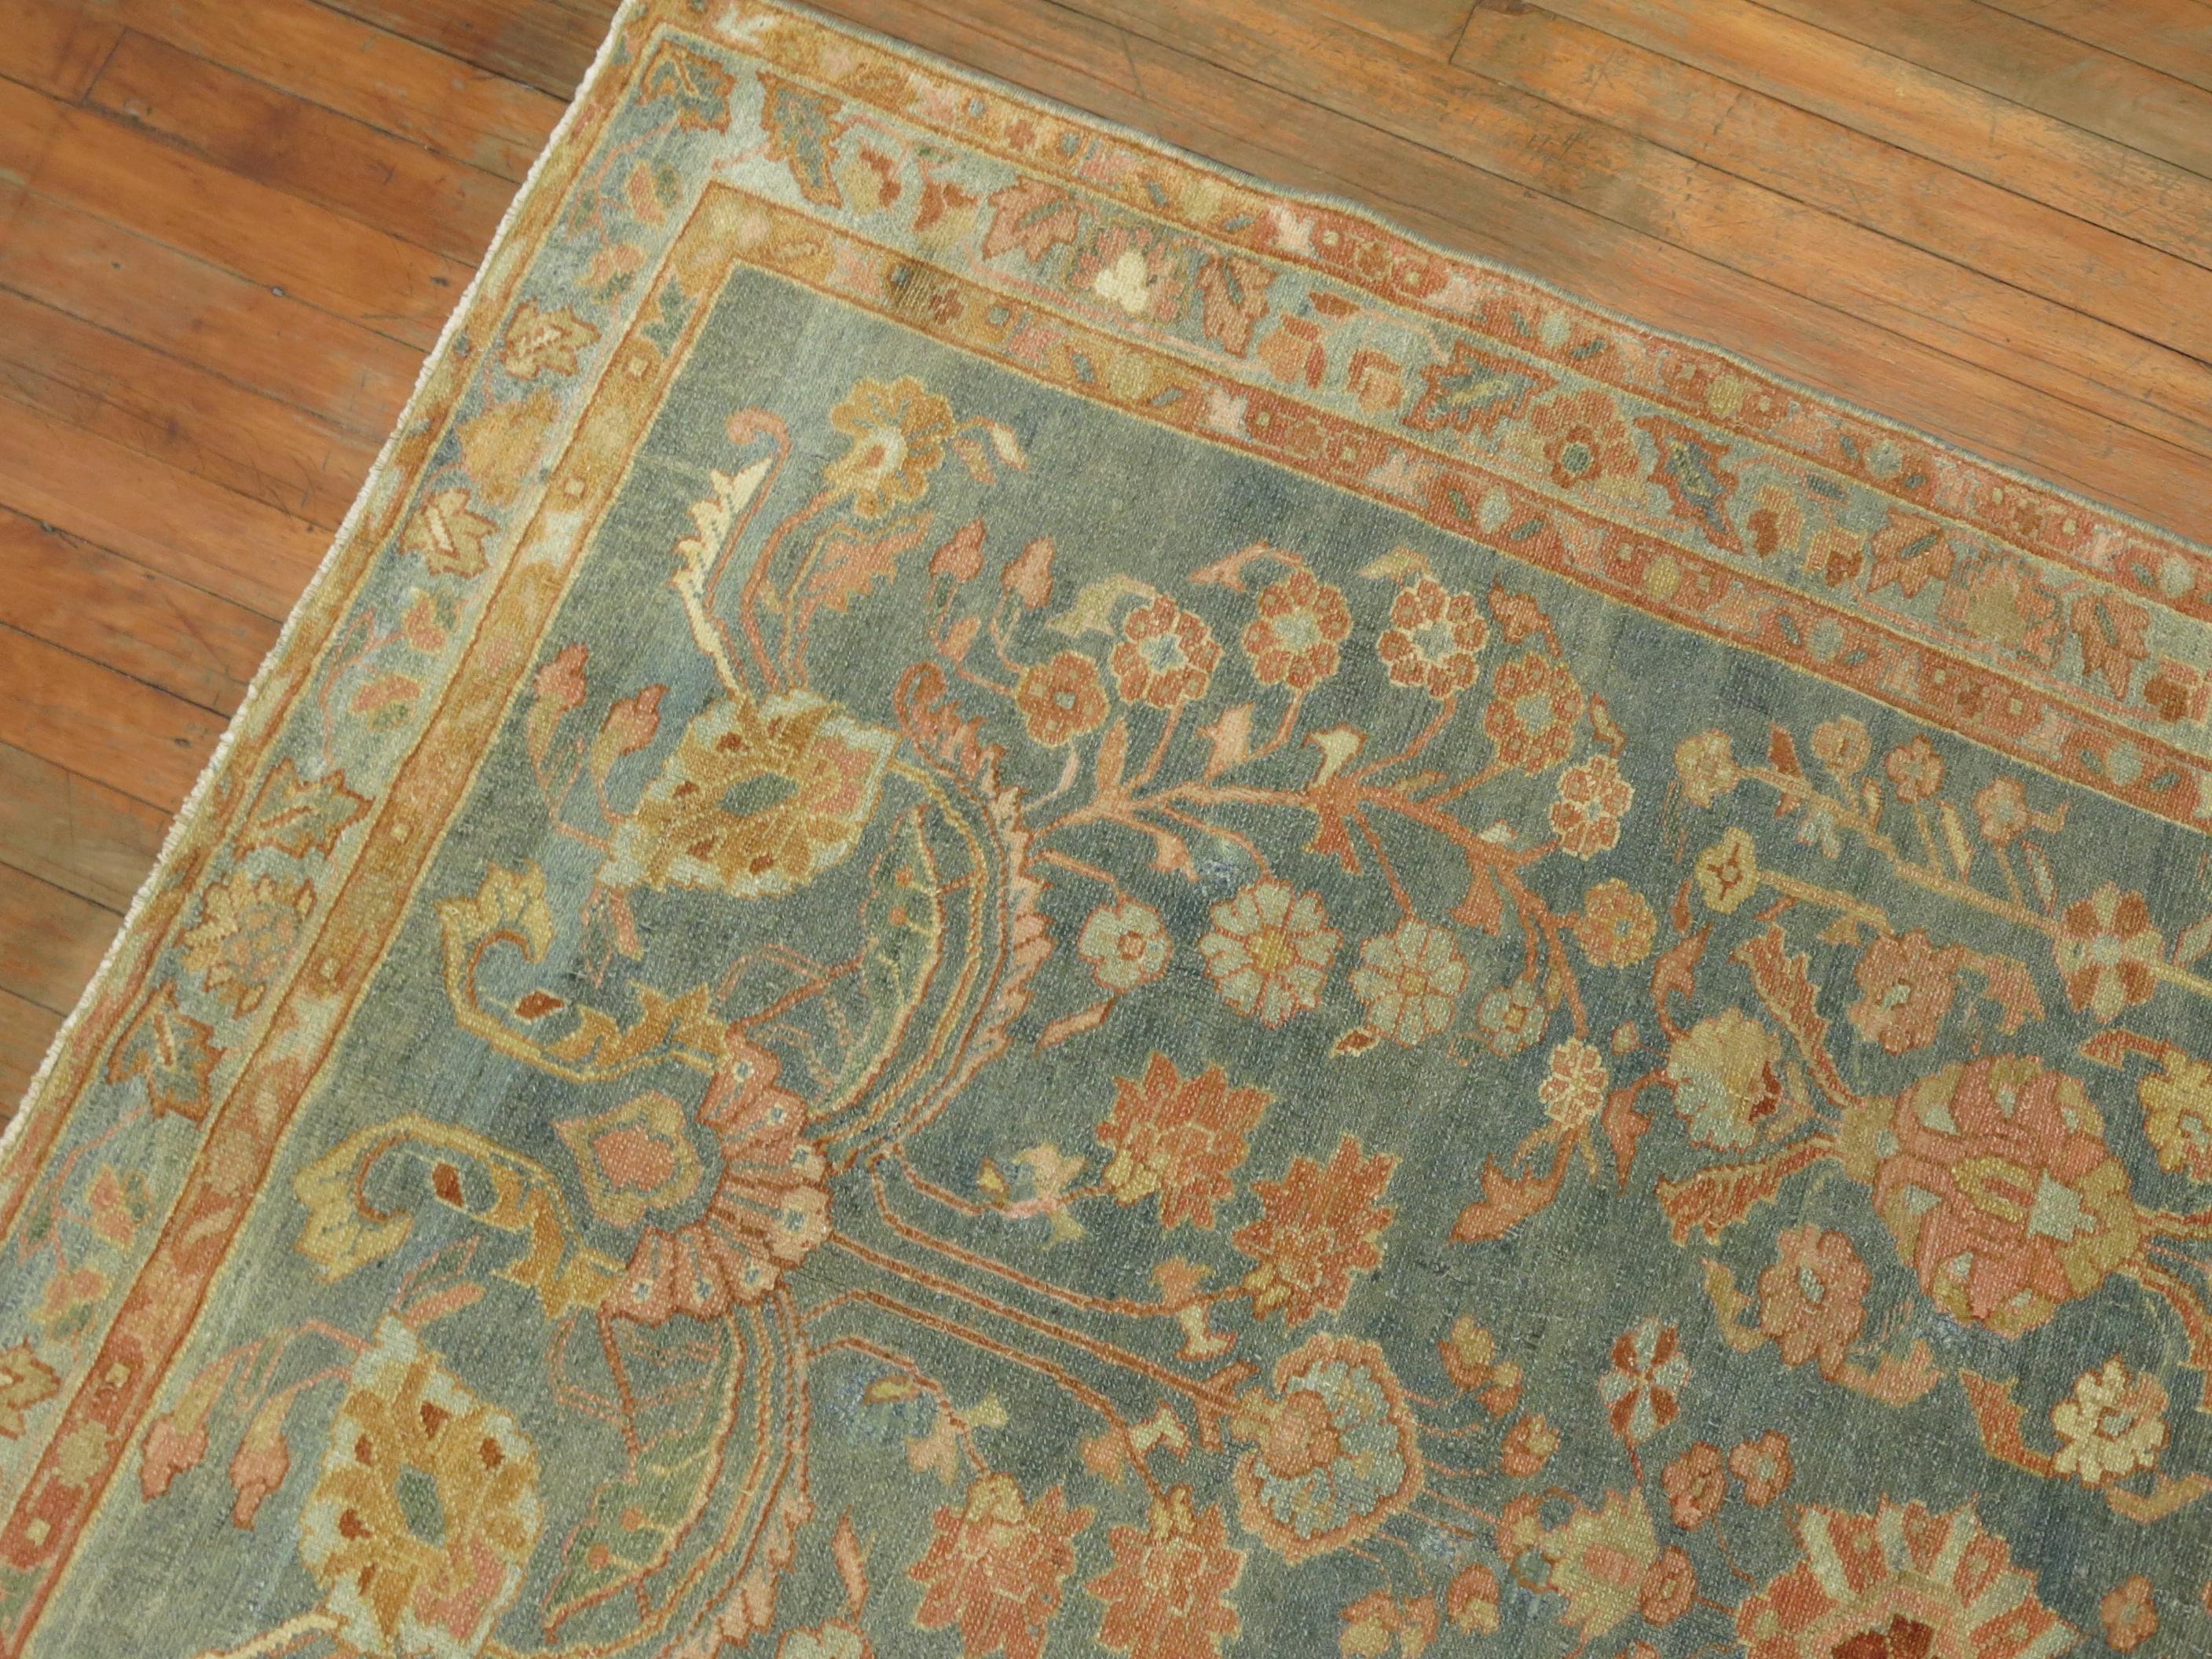 Hand-Woven Soft Green Apricot Persian Malayer Rug